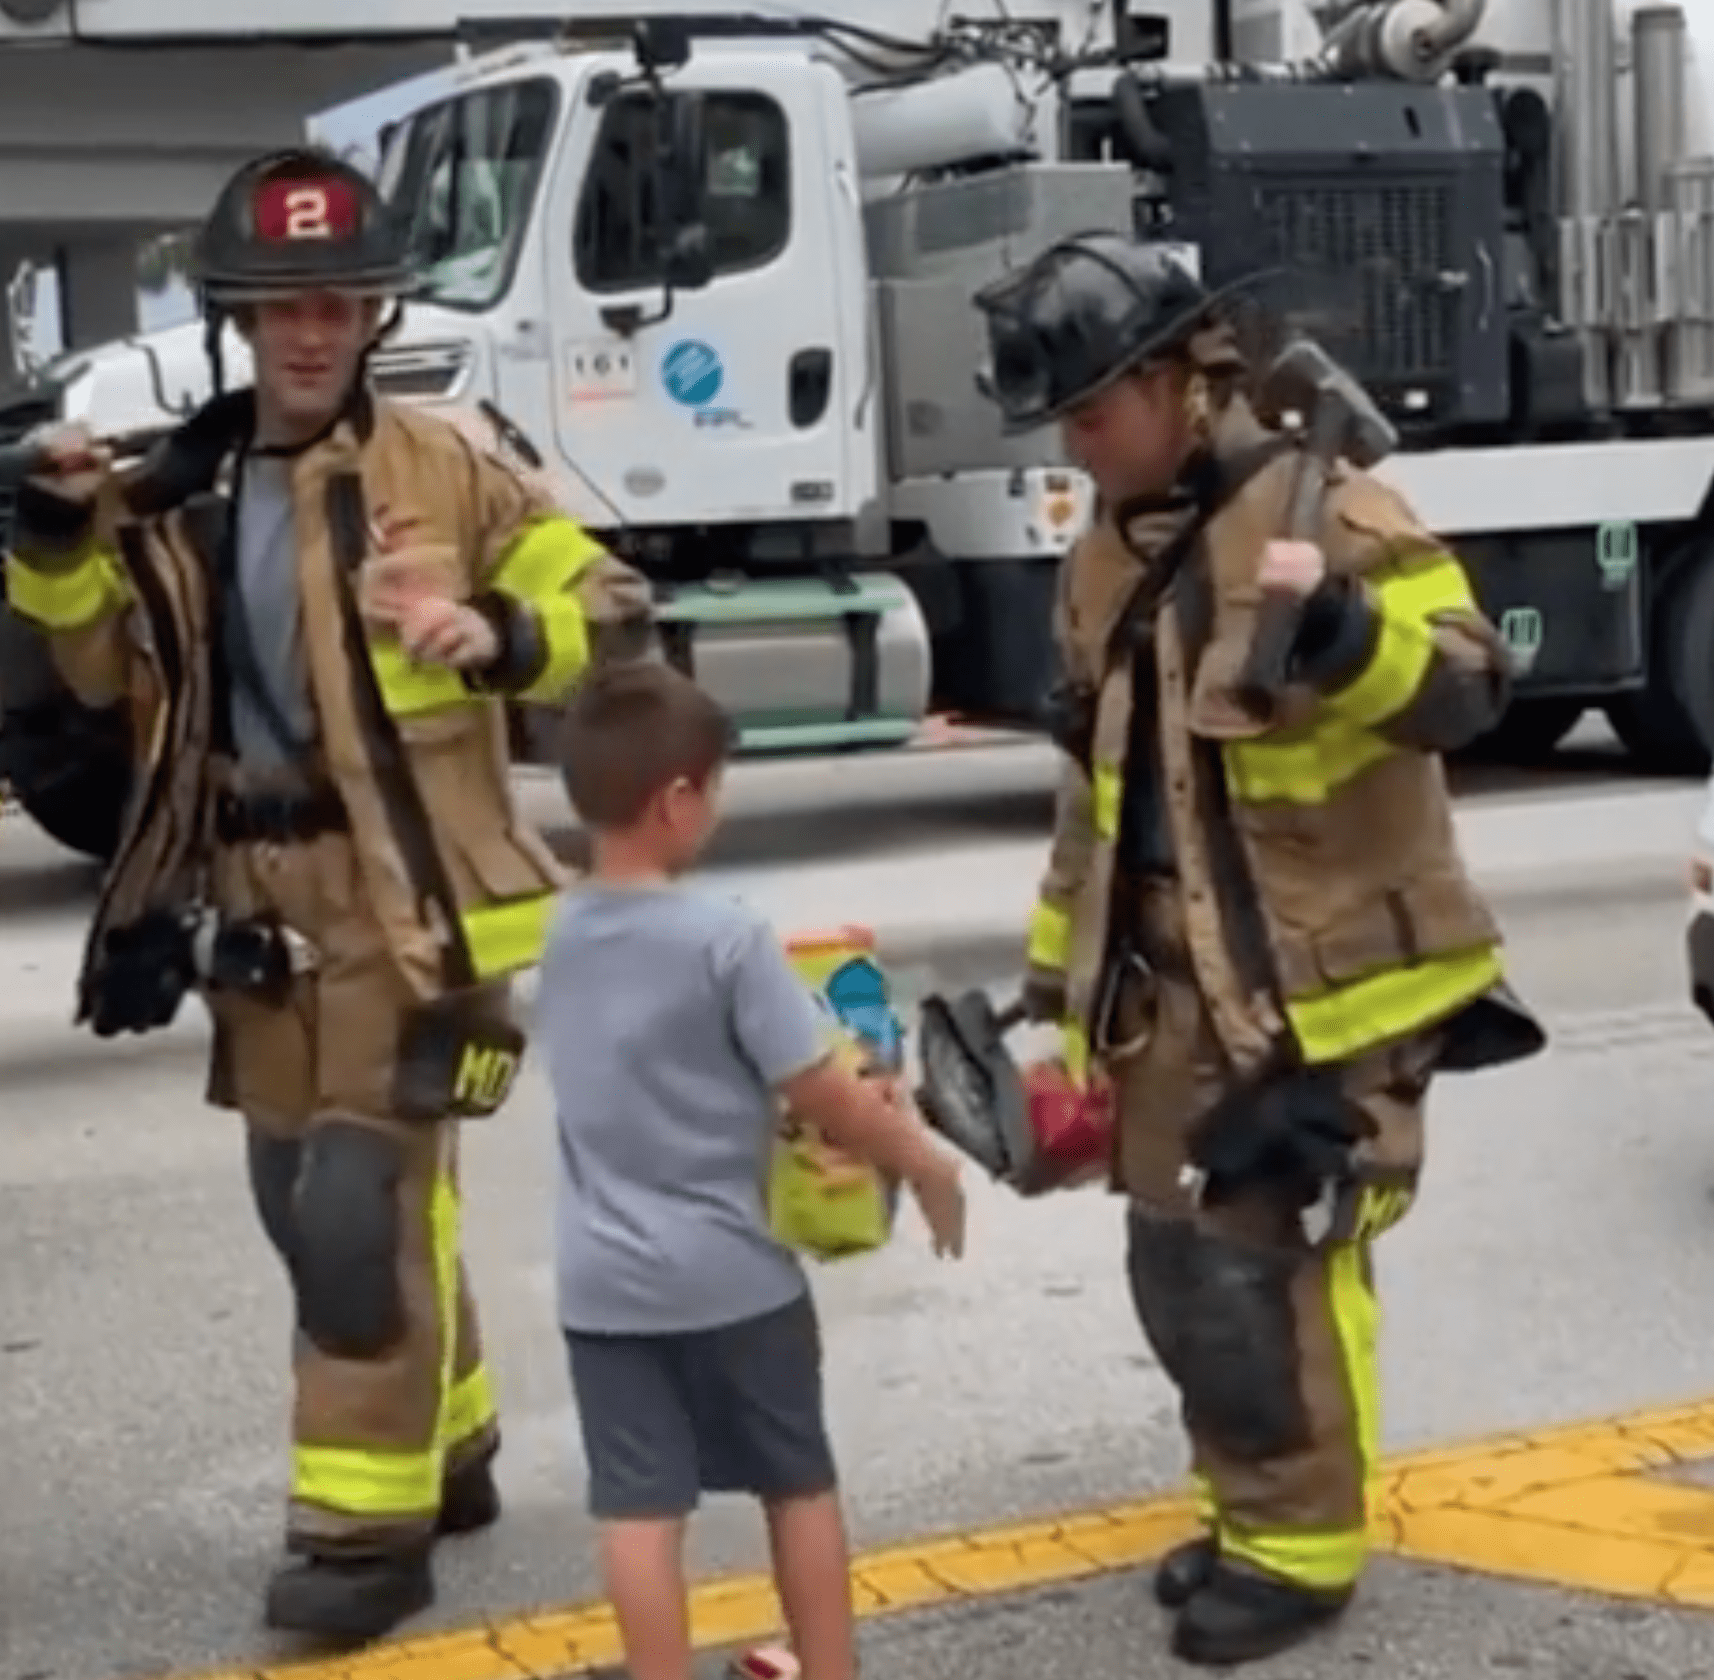 Boy distributes candy and sodas to firemen | Photo: Reddit/Thund3rbolt 